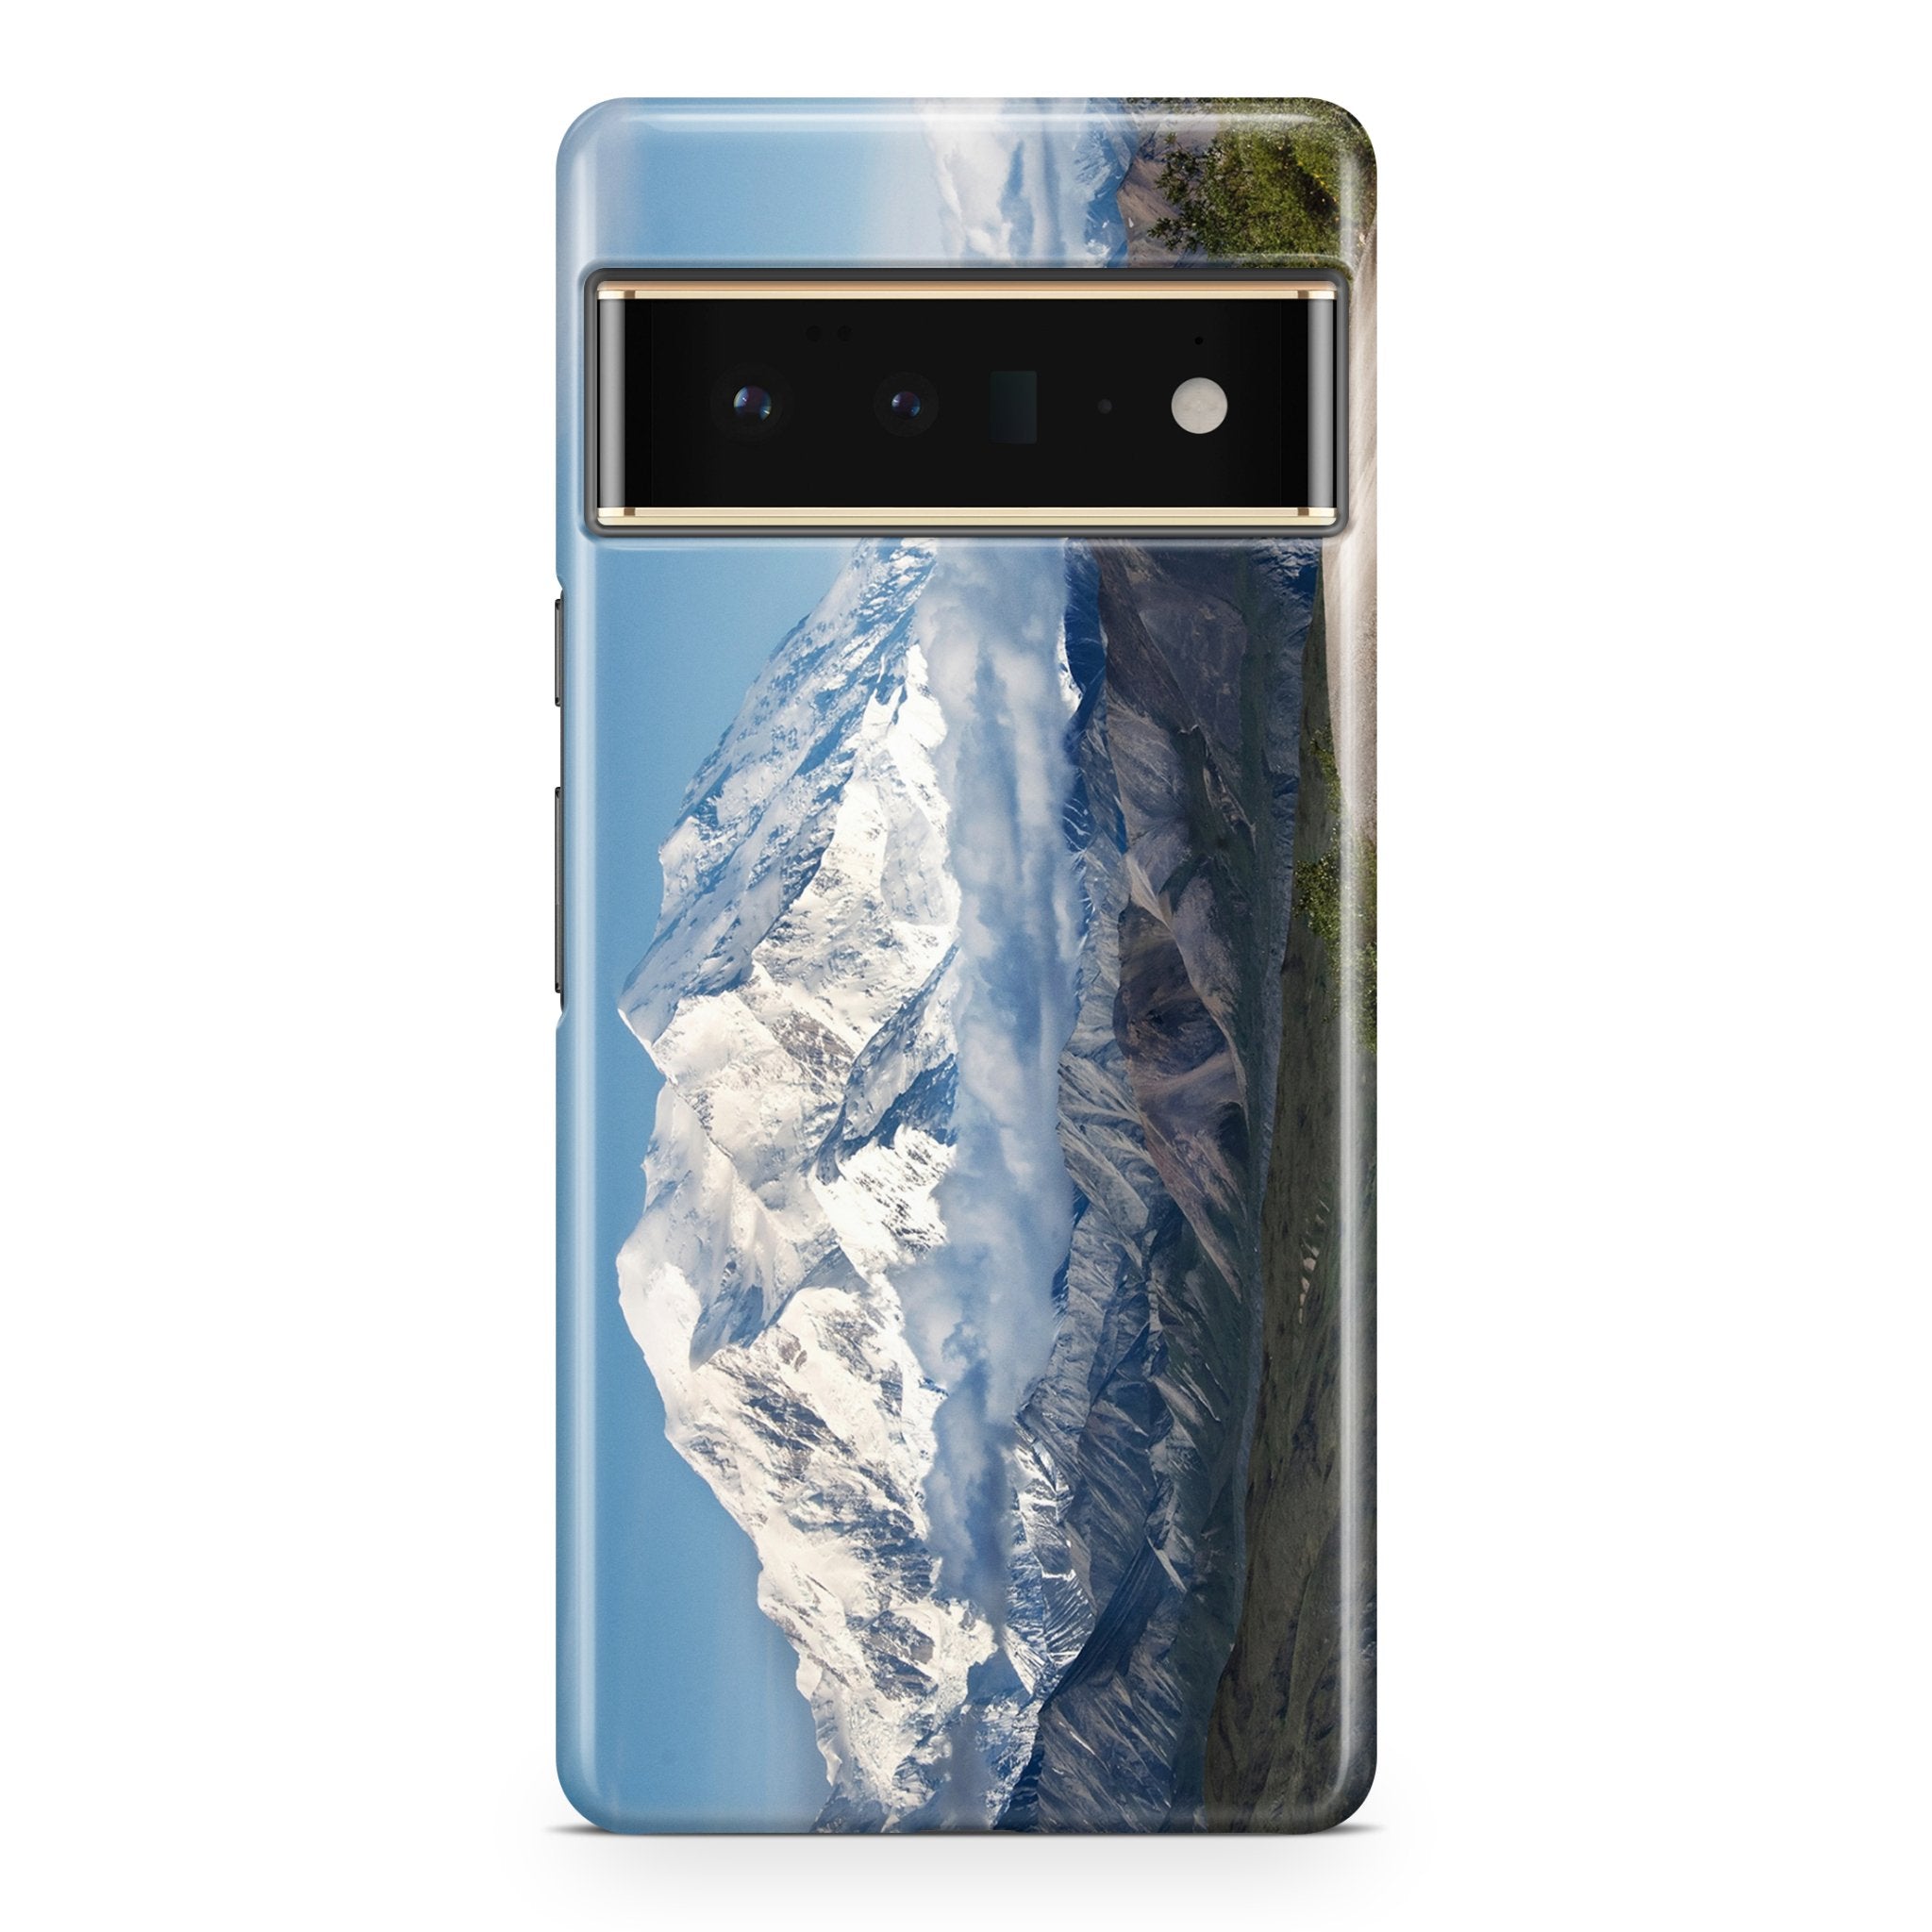 Mountain Range - Google phone case designs by CaseSwagger